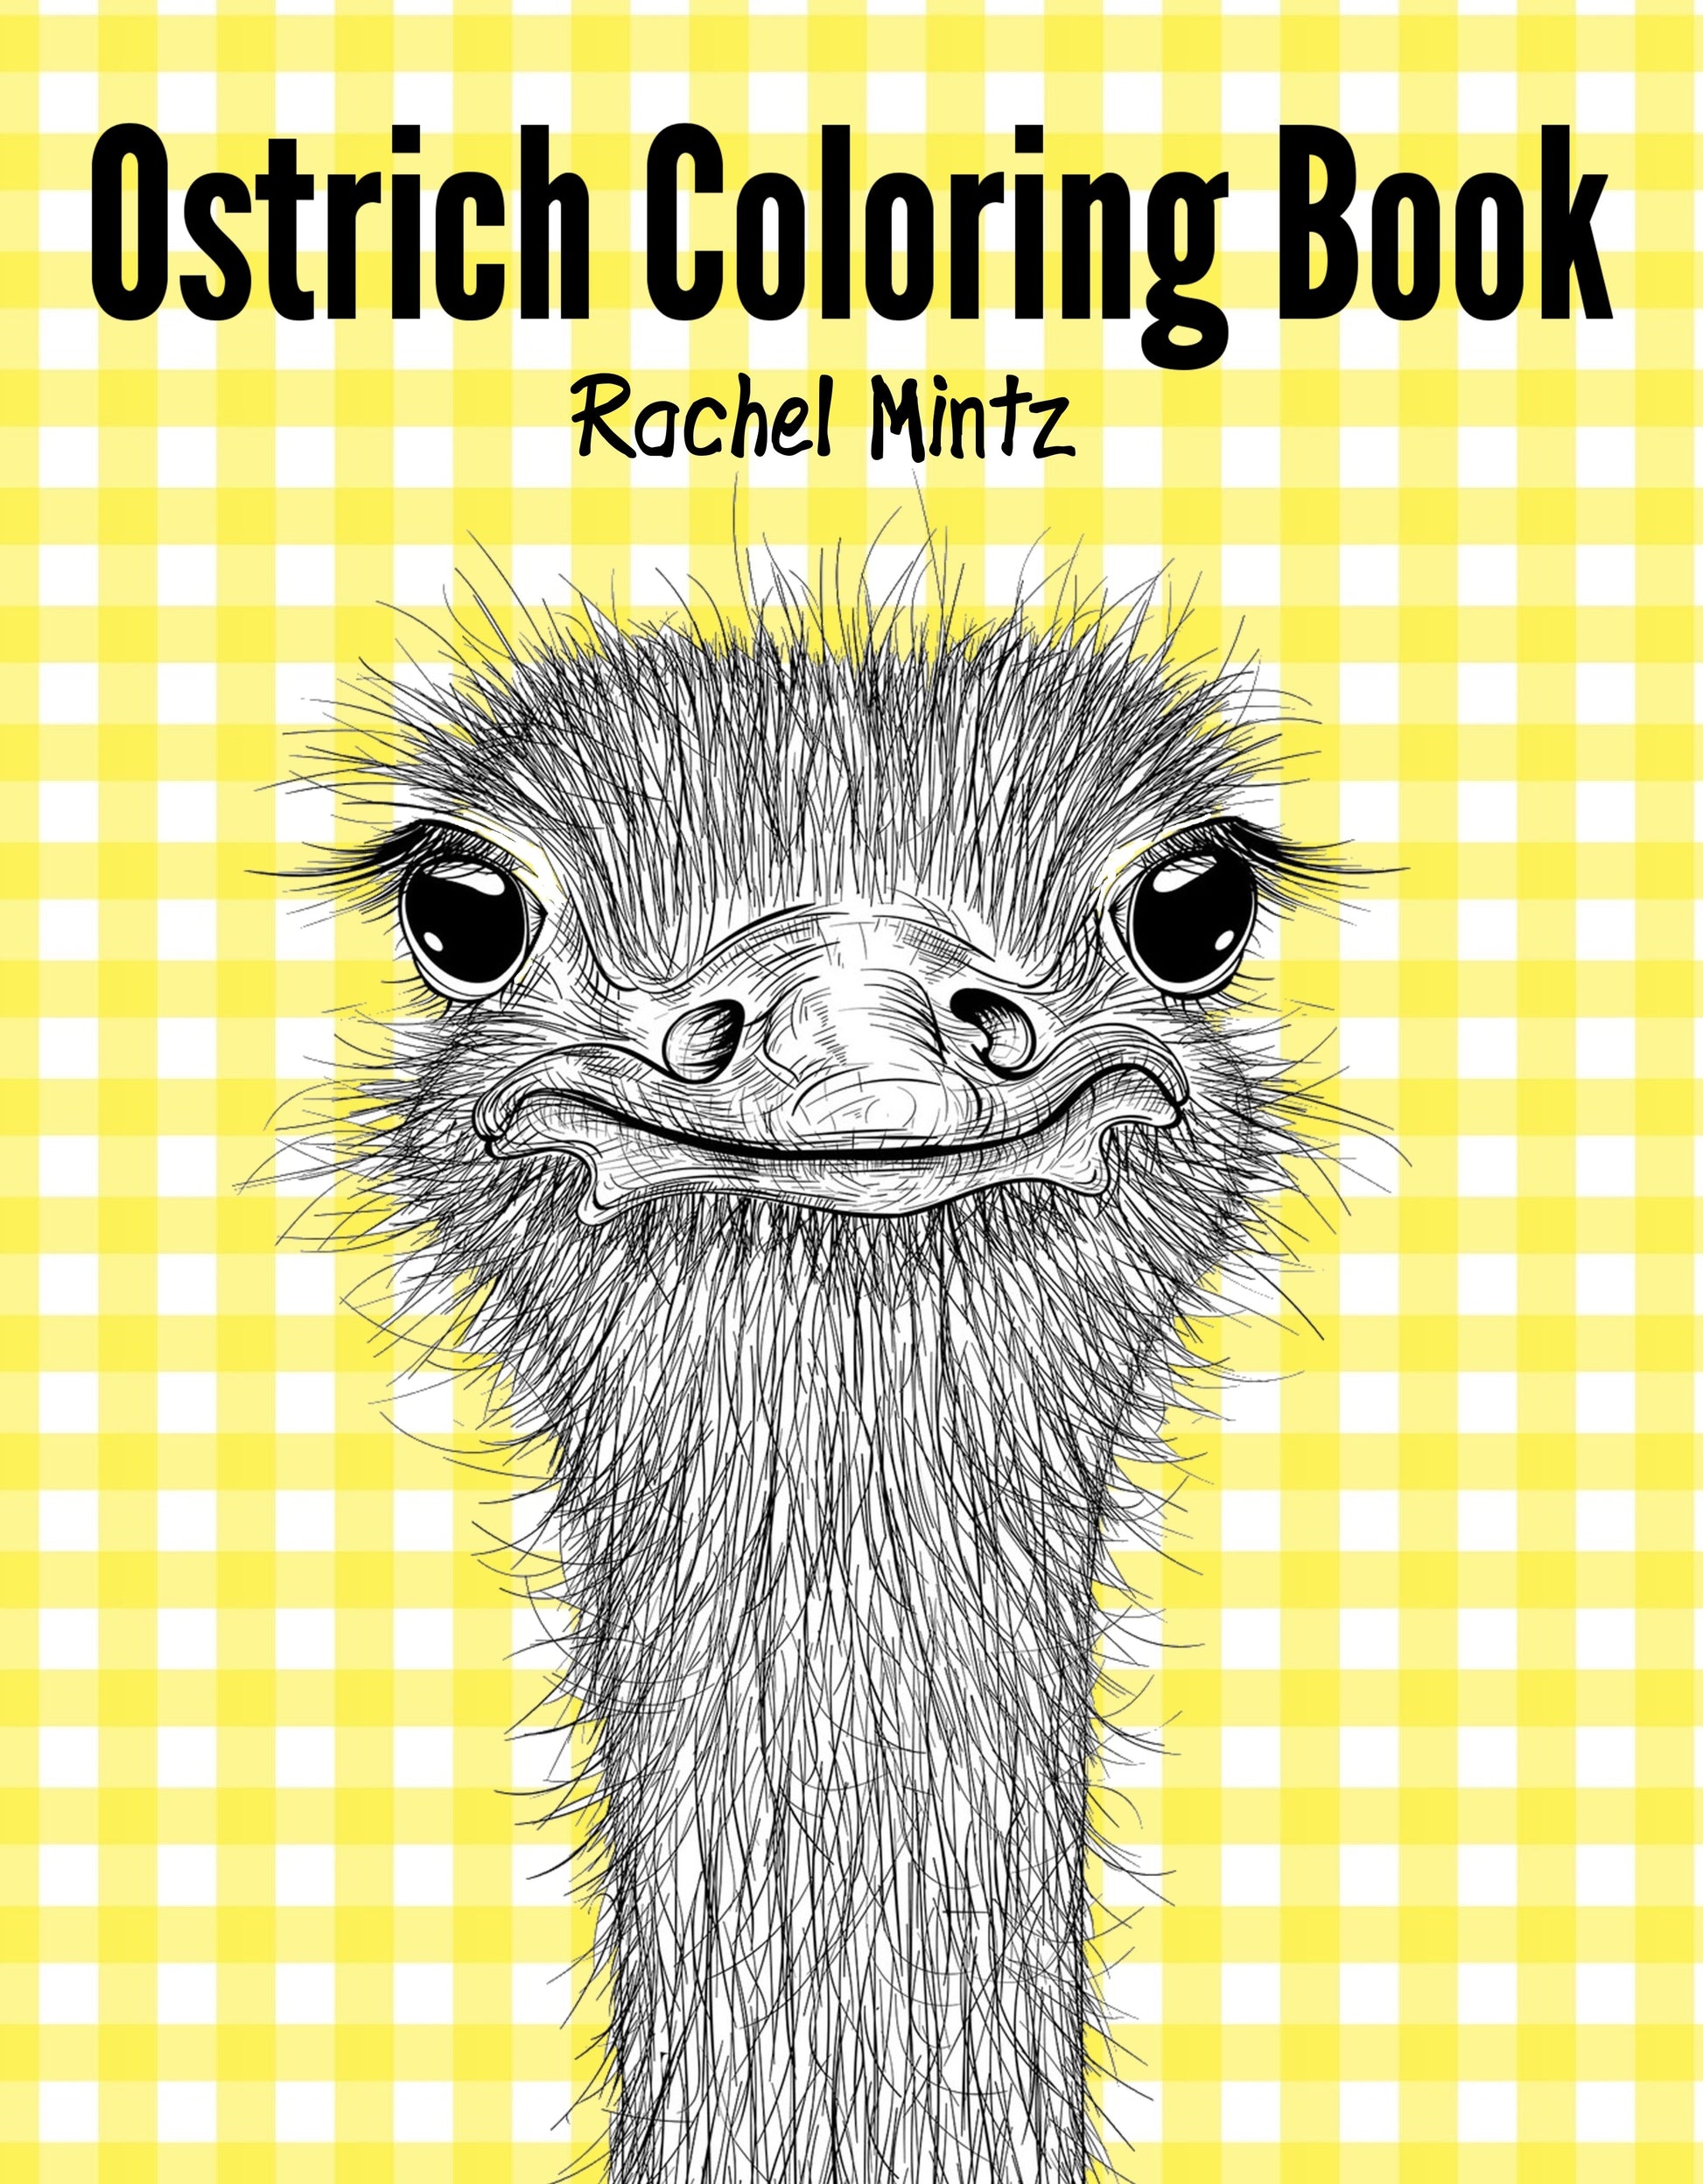 Ostrich Coloring Book Sweet Ostriches in Doodle Patterns Rachel Mintz